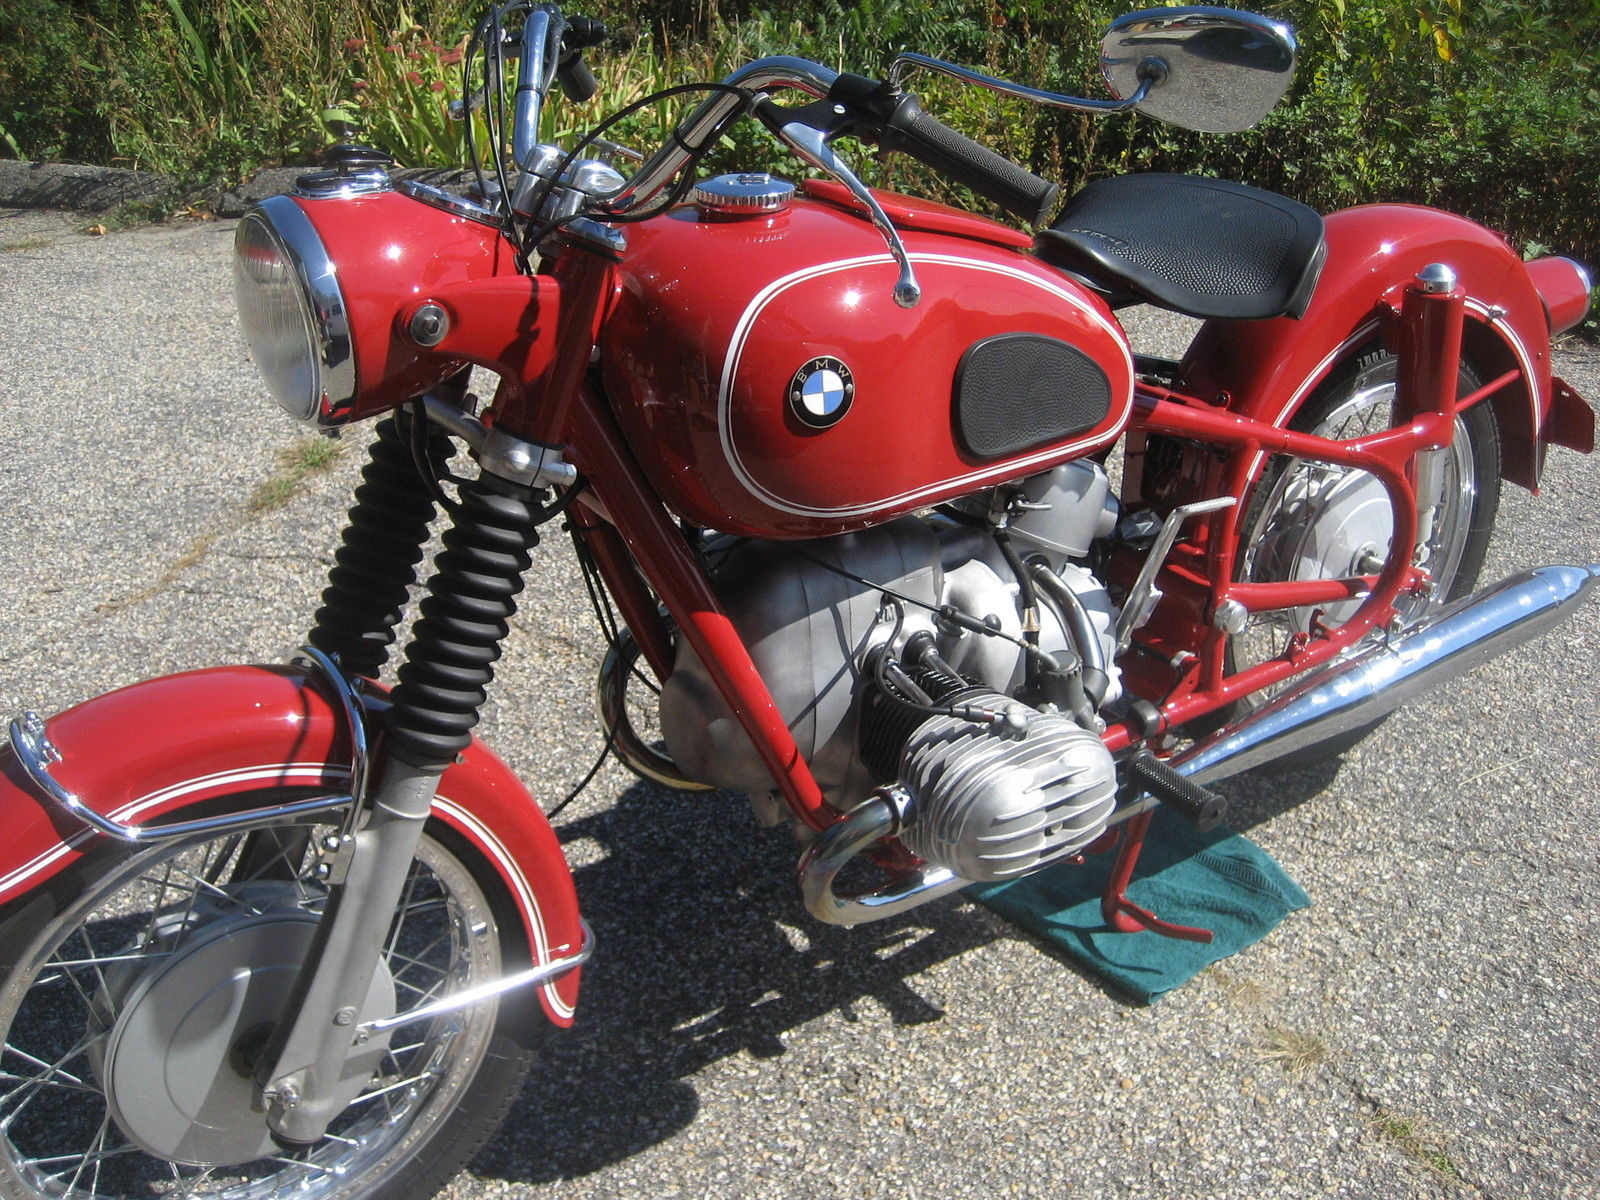 BMW R60 - 1969 - Left Side View, Engine, Tank and Frame.